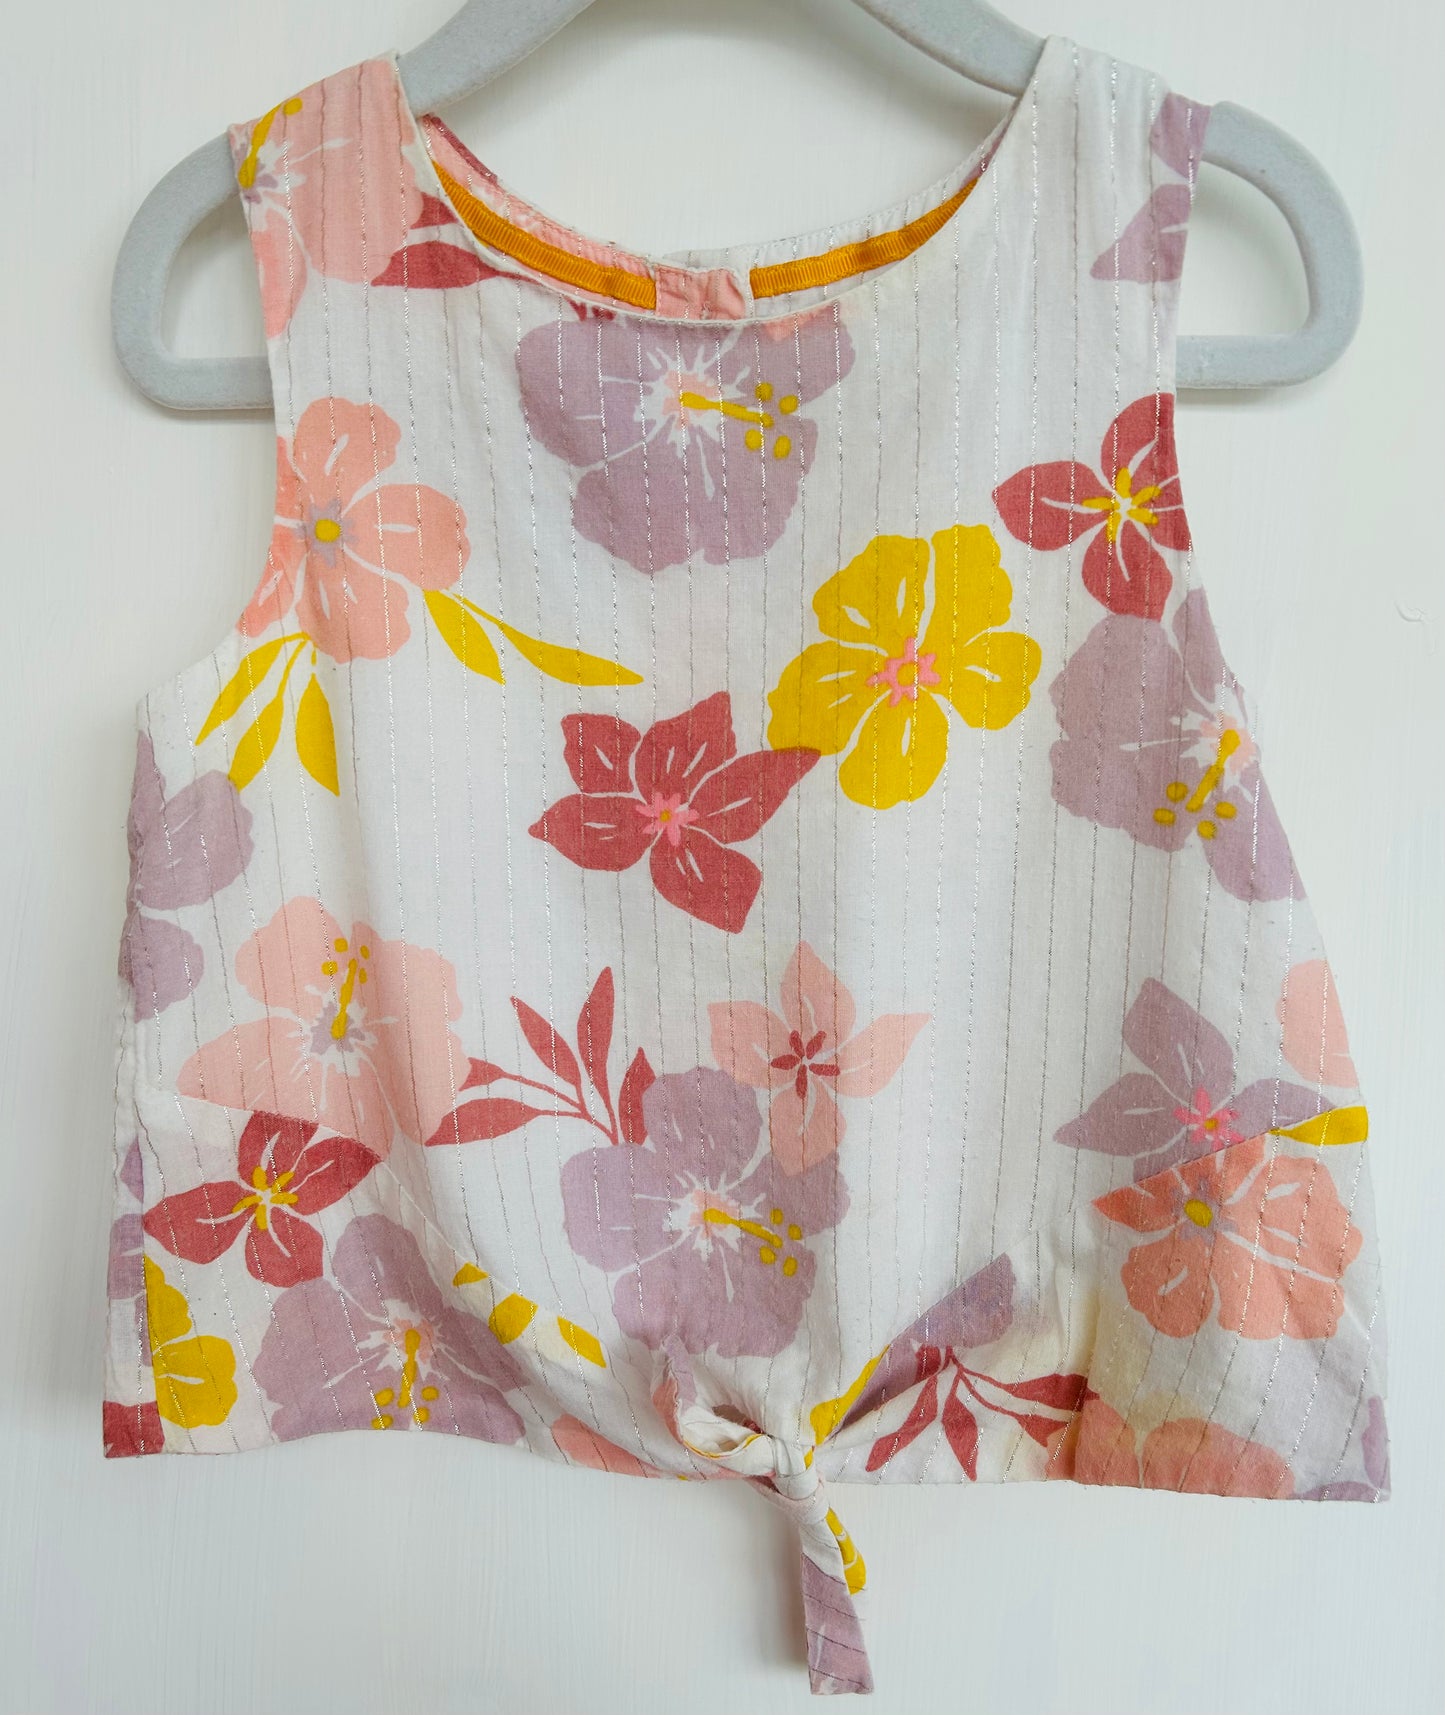 M & S floral top 4-5yrs